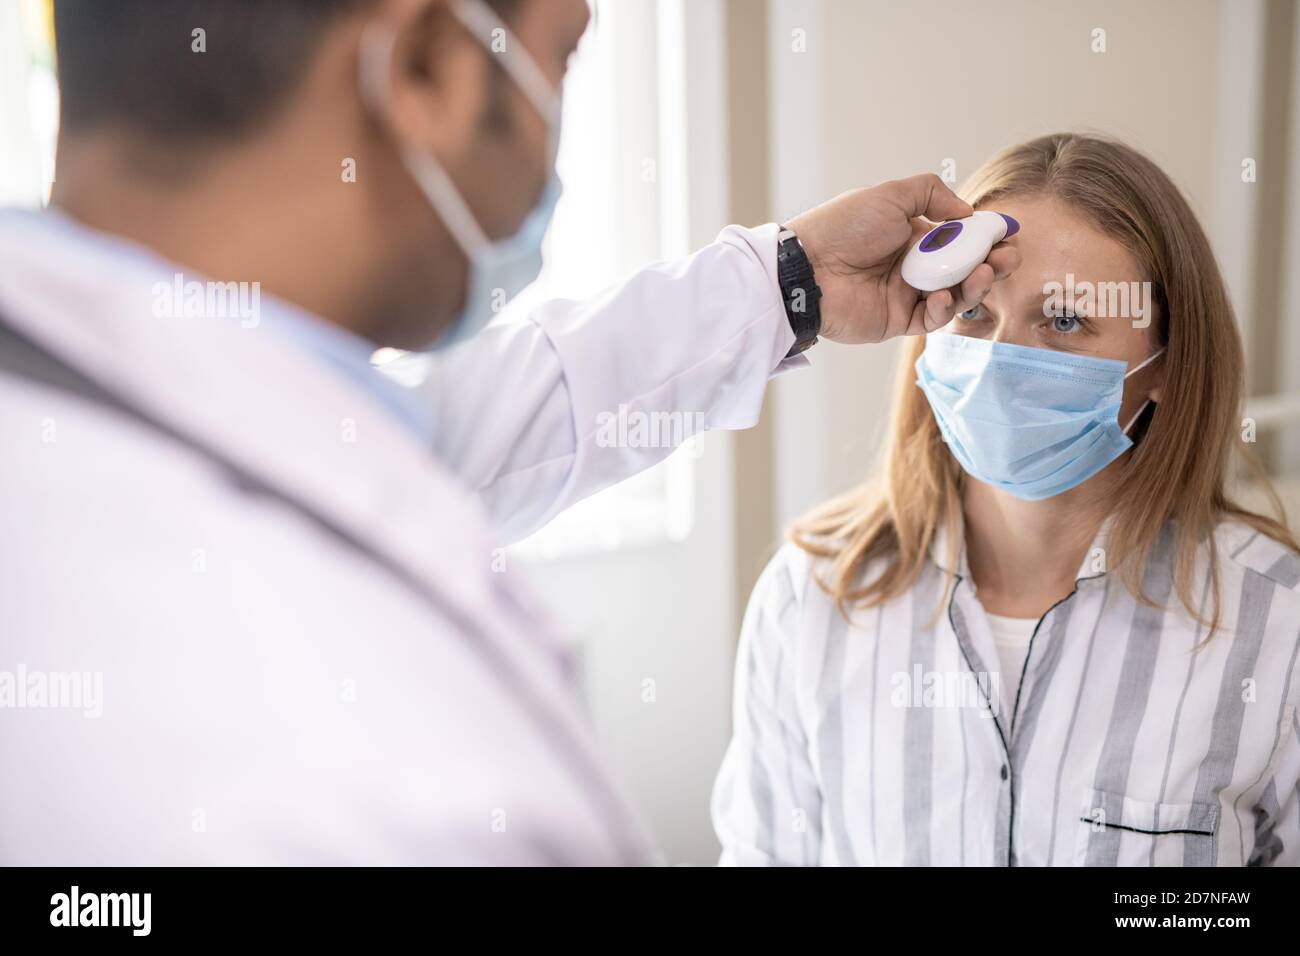 Young female patient in protective mask having her body temperature measured Stock Photo